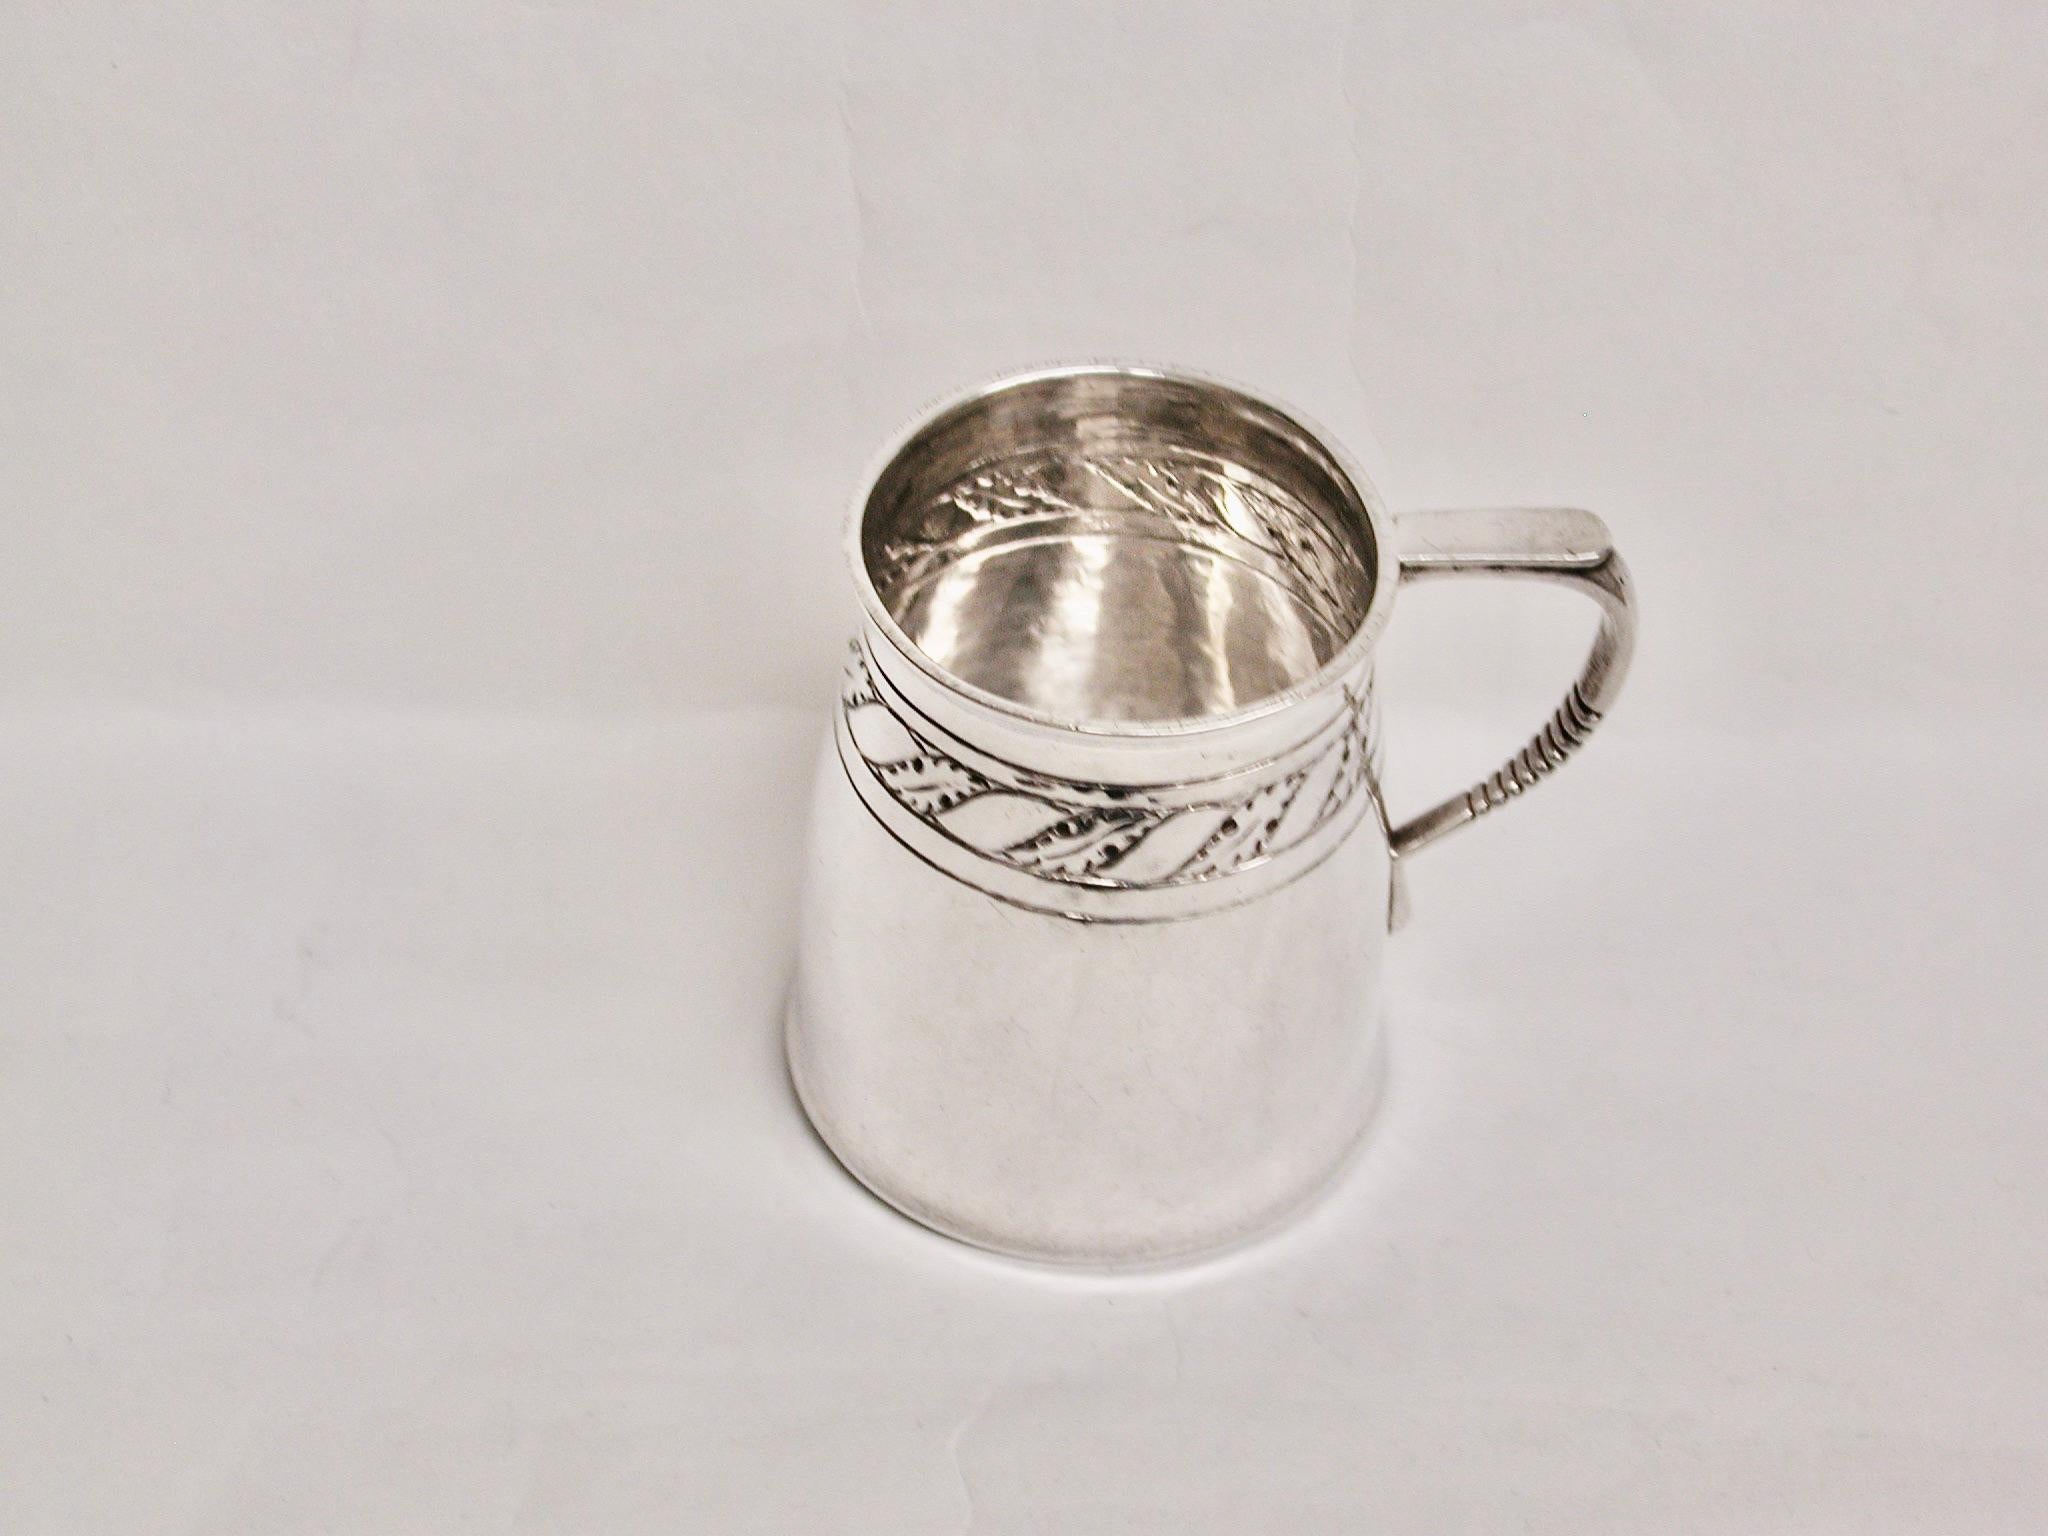 English Antique Arts & Crafts Liberty & Co Silver Child's Tankard Dated 1923 Birmingham For Sale